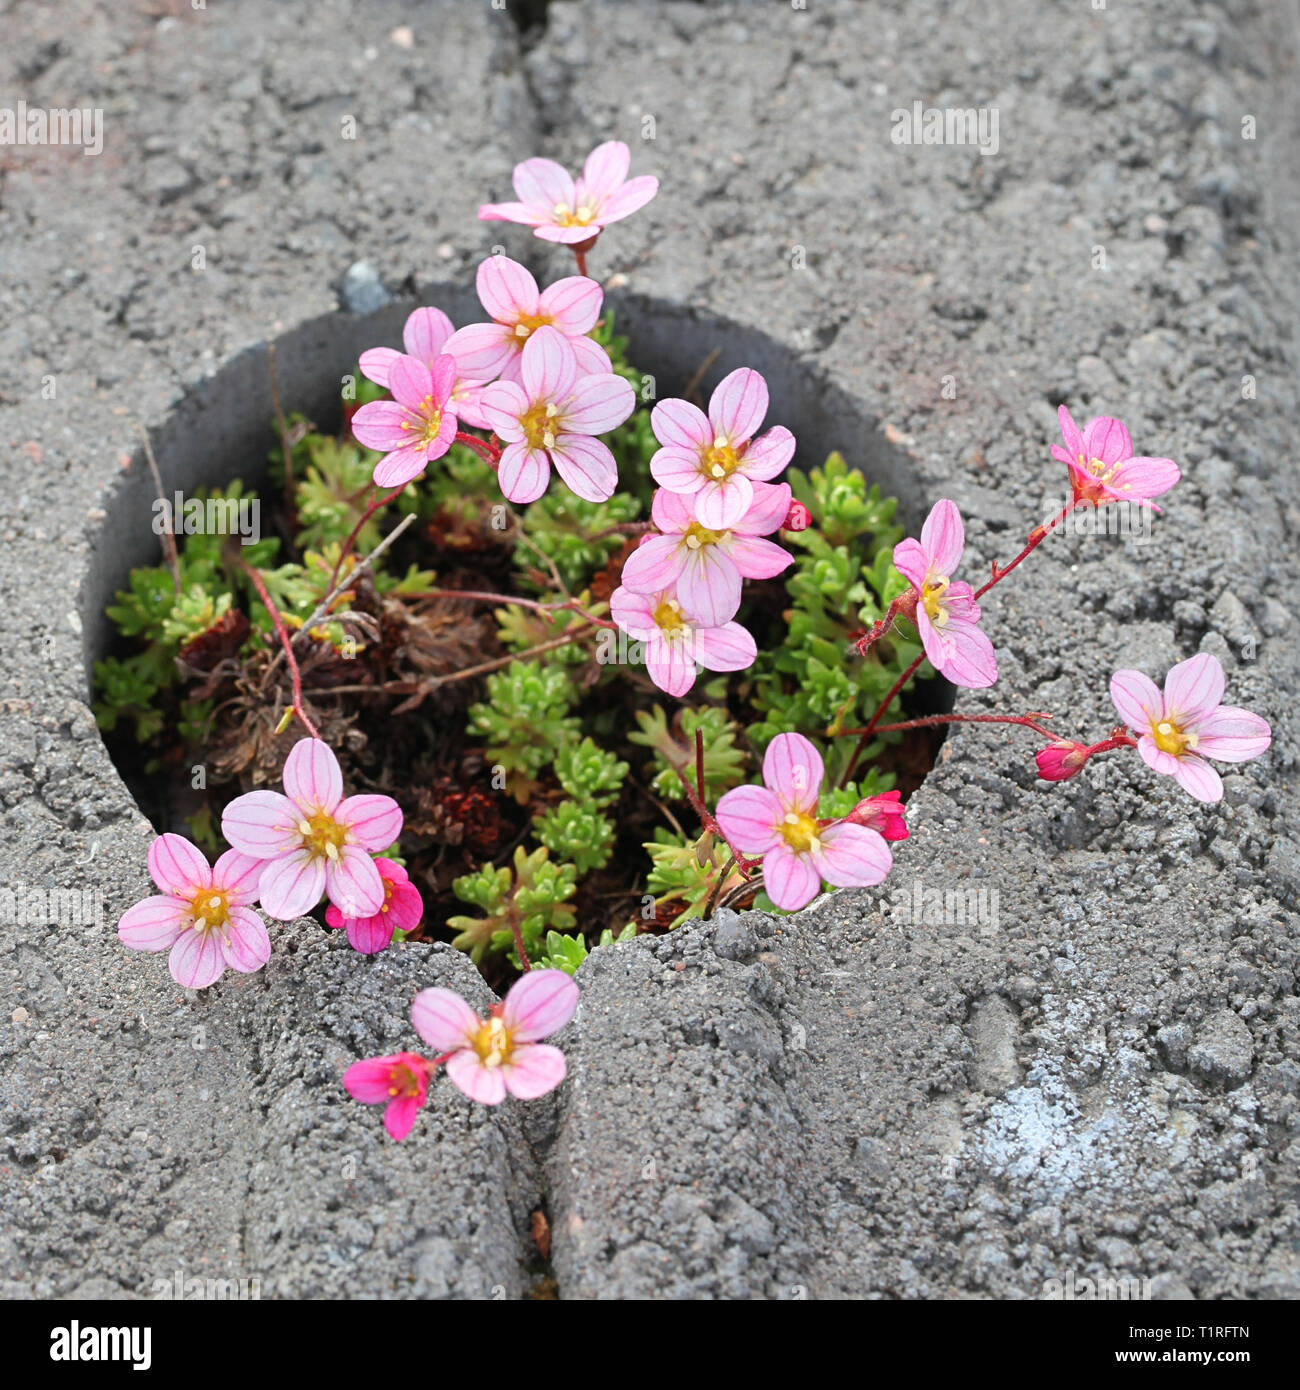 Saxifraga × arendsi, commonly called mossy saxifrage or mossy rockfoil Stock Photo